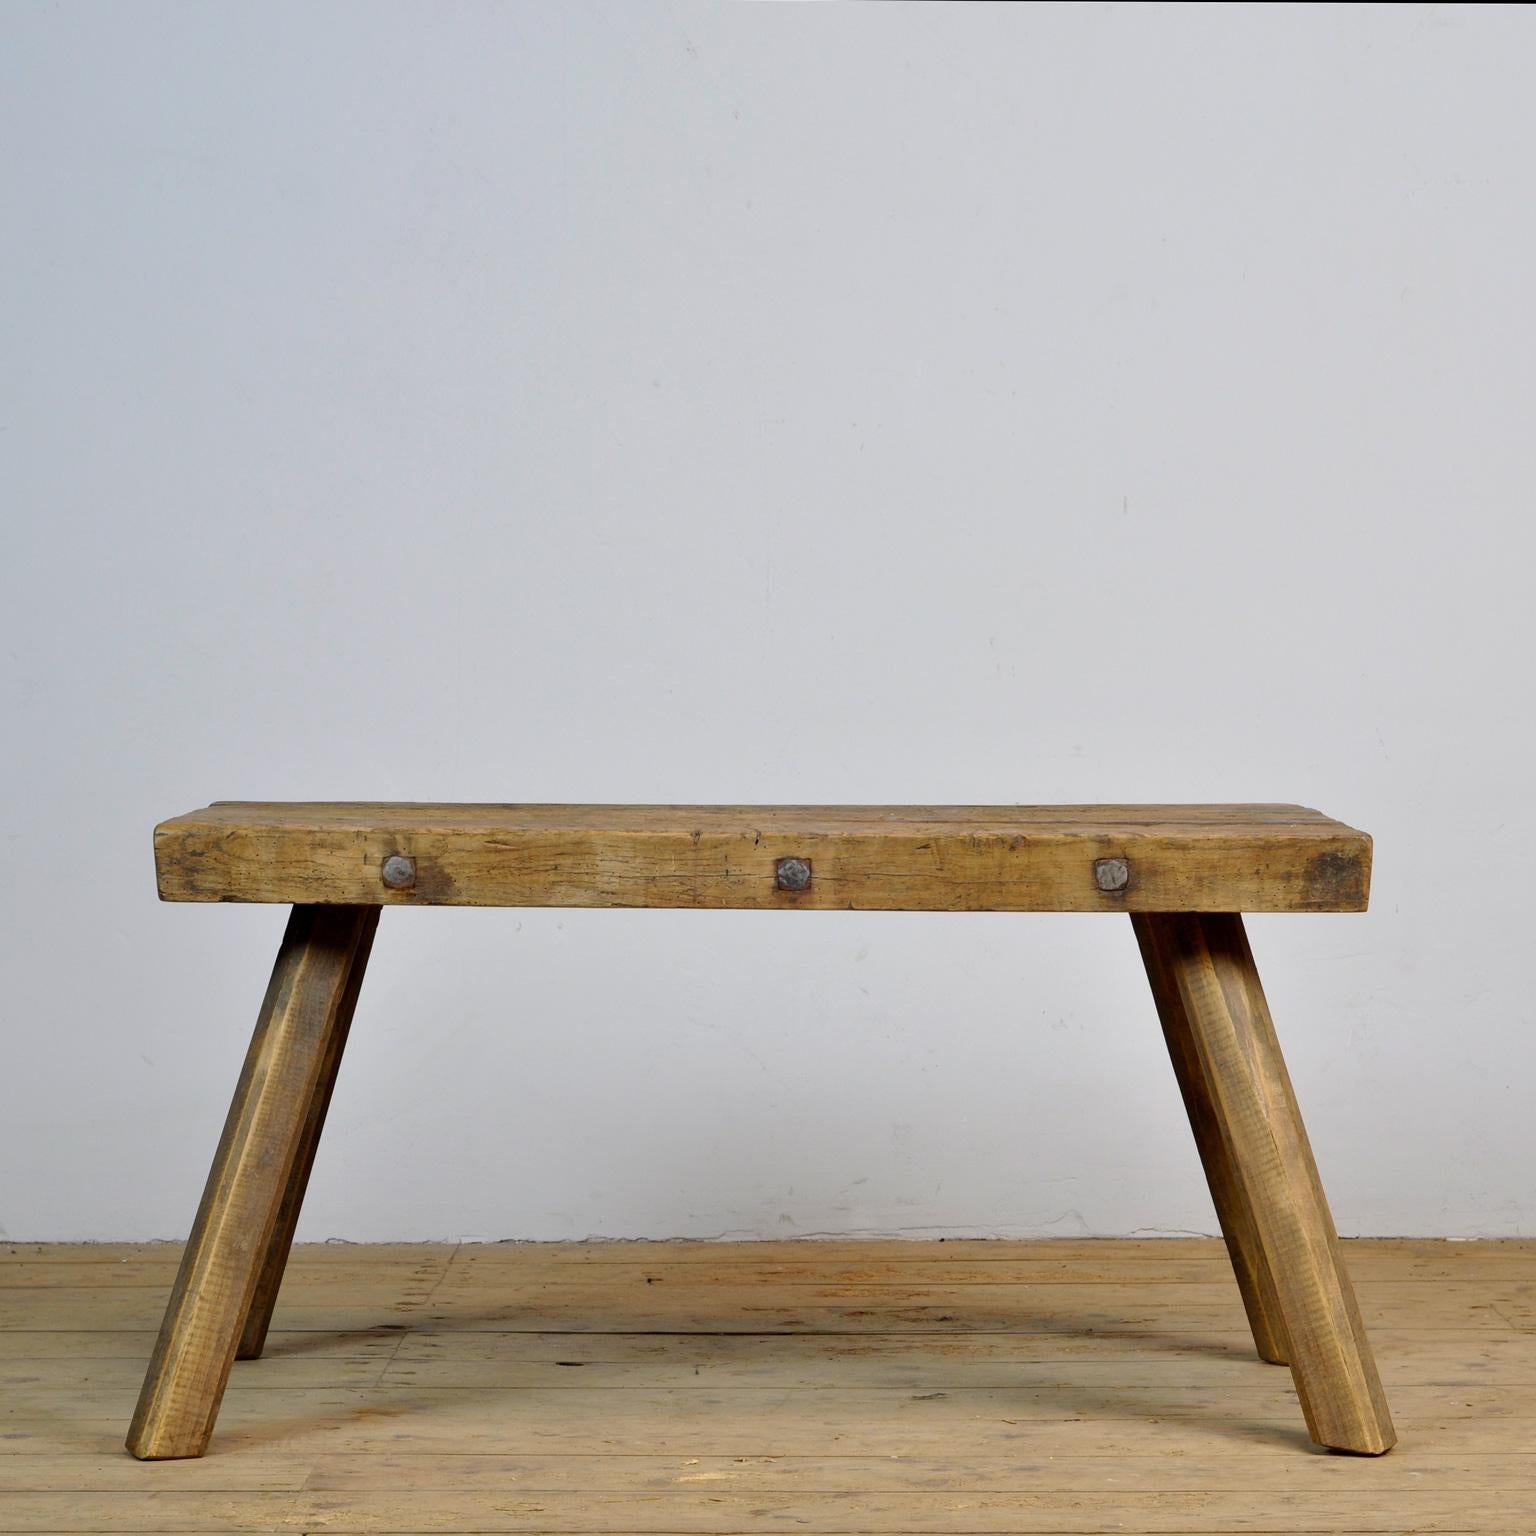 This oak butcher's farm table was produced in Hungary around the 1930s. With an oak top of 6 cm thick. The legs are shortened to the ideal height for a coffee table or bench. Treated for woodworm.